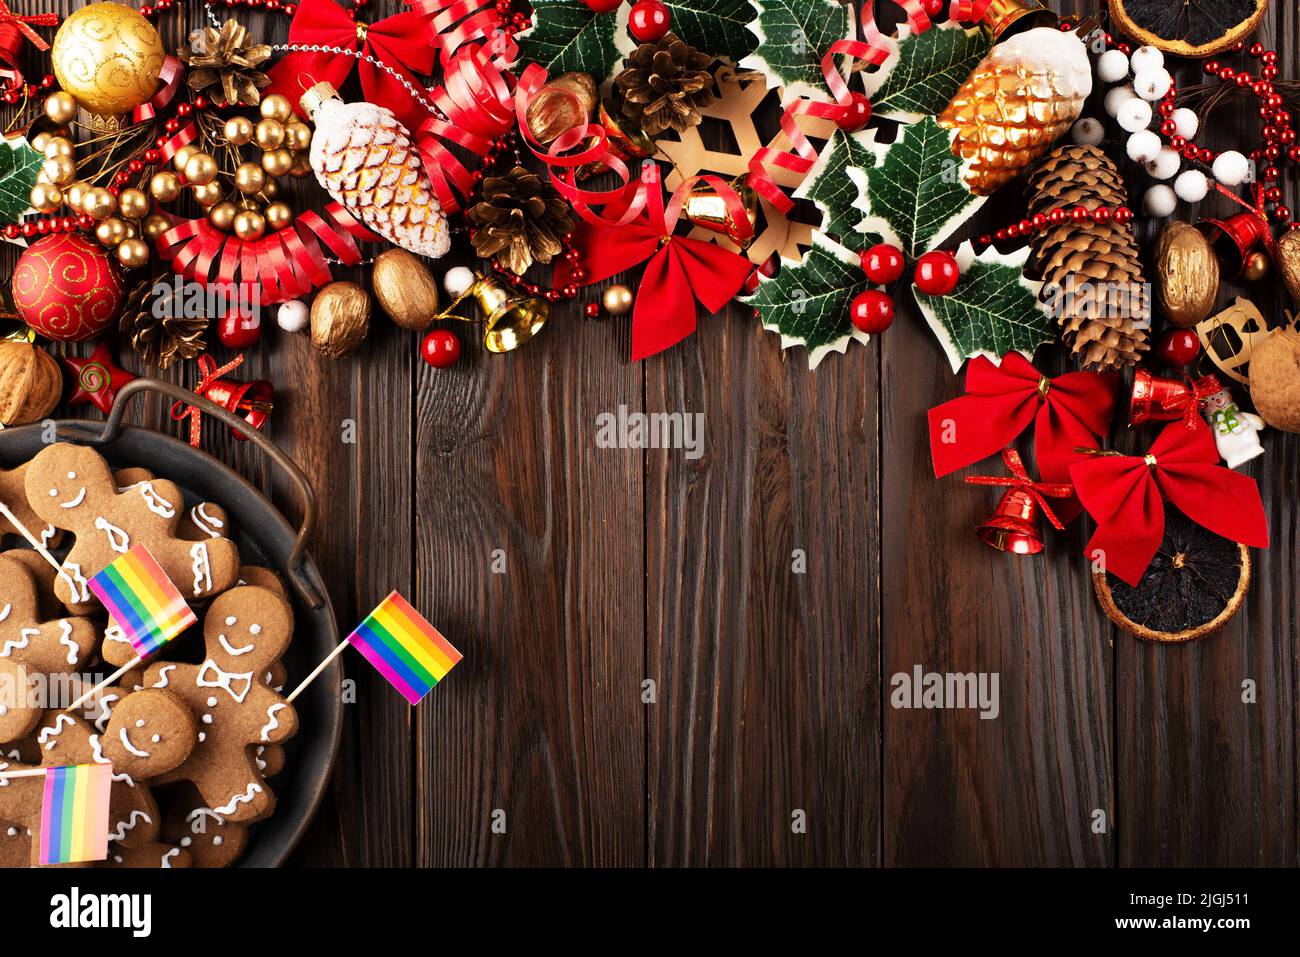 Christmas background of tray with gingerbread cookie men and rainbow flags on wooden table Stock Photo